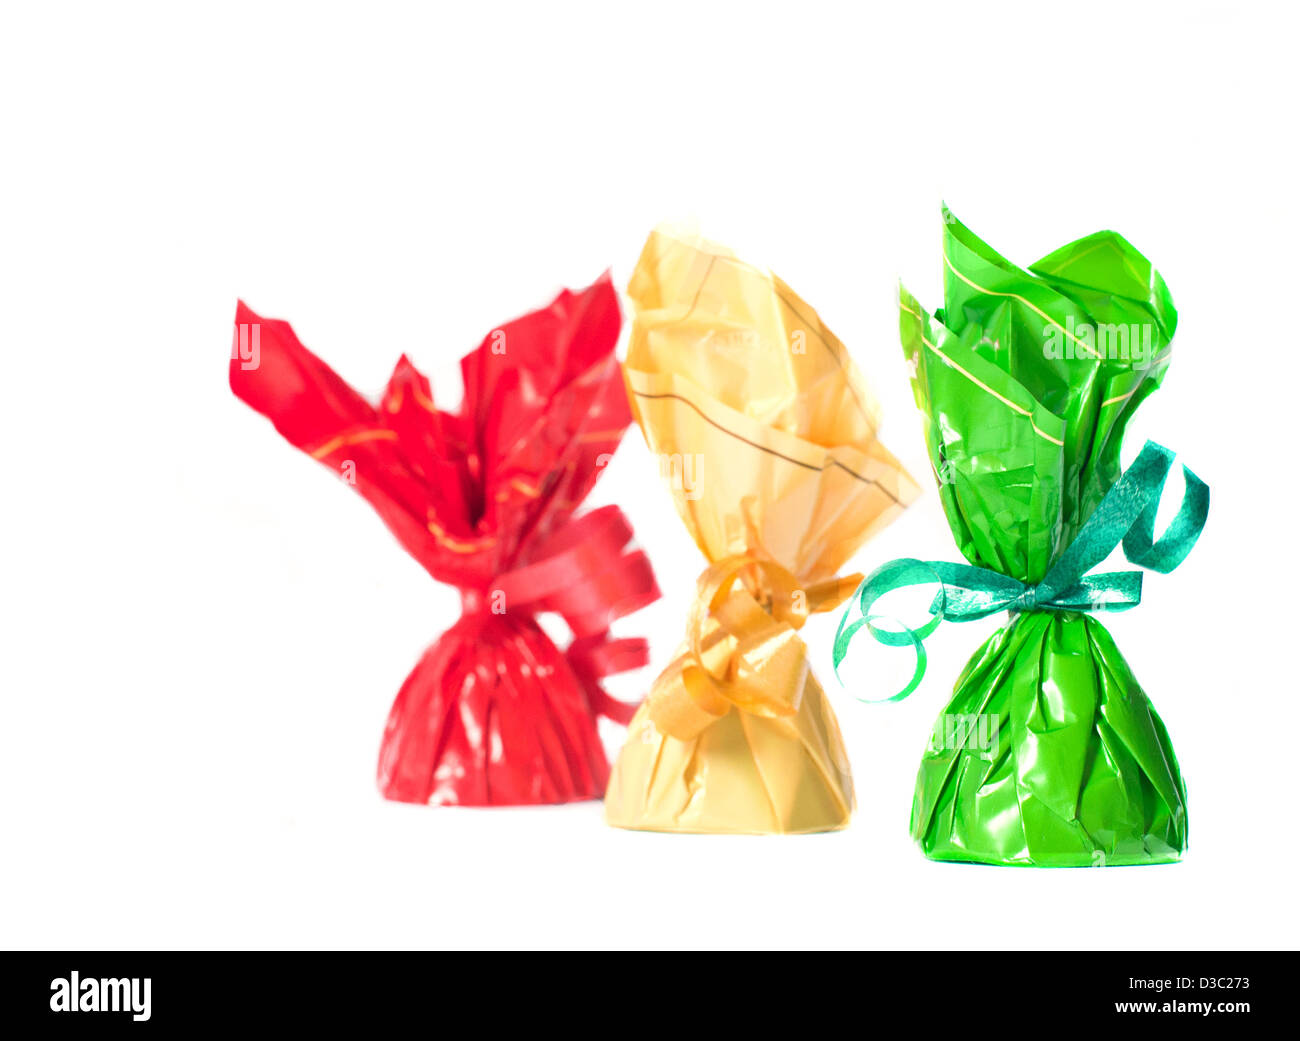 three objects, yellow, green, red, diet, sweet wrapper, hard candy, packaging, multi colored, color image, isolate Stock Photo